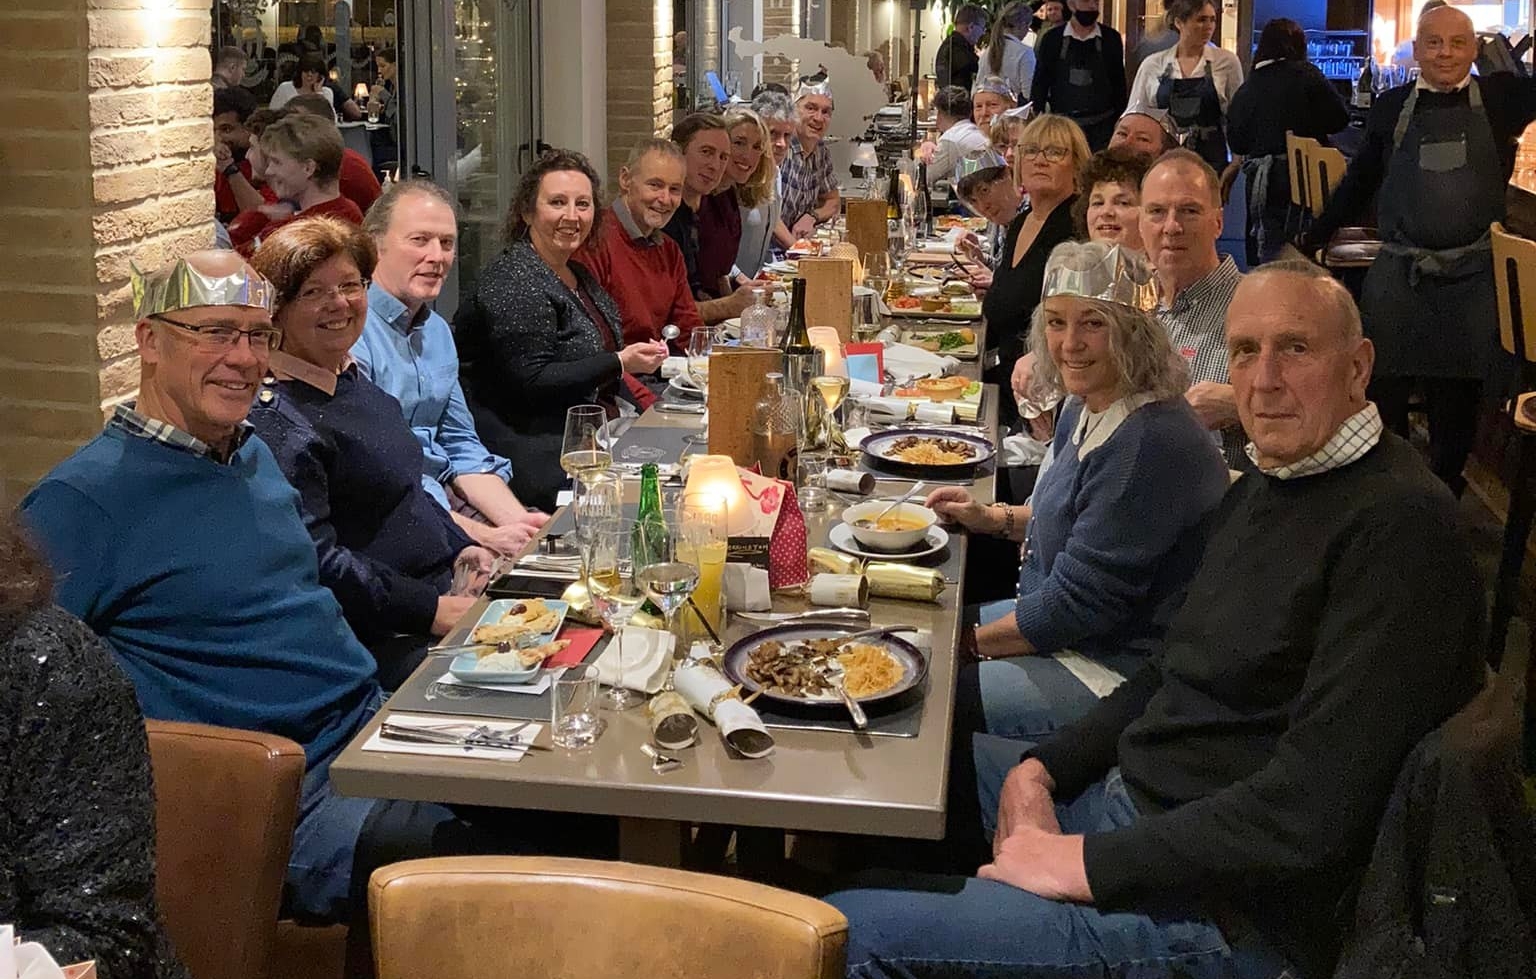 GMSC Christmas meal 2021 – Gloucester Masters